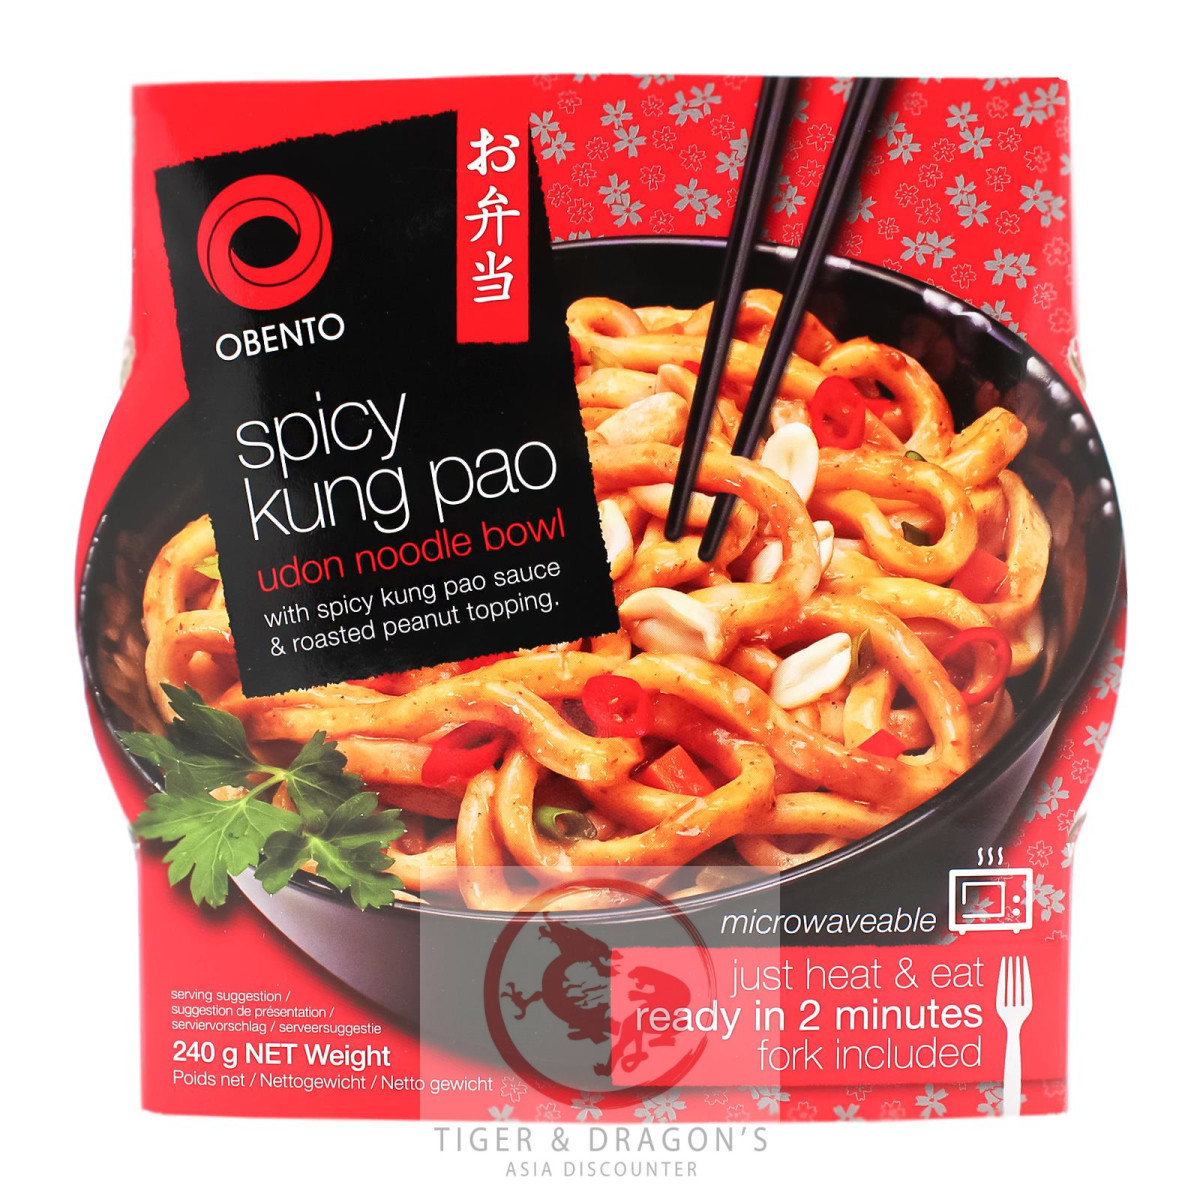 Obento Spicy Kung Pao Udon Nudeln Bowl 240g